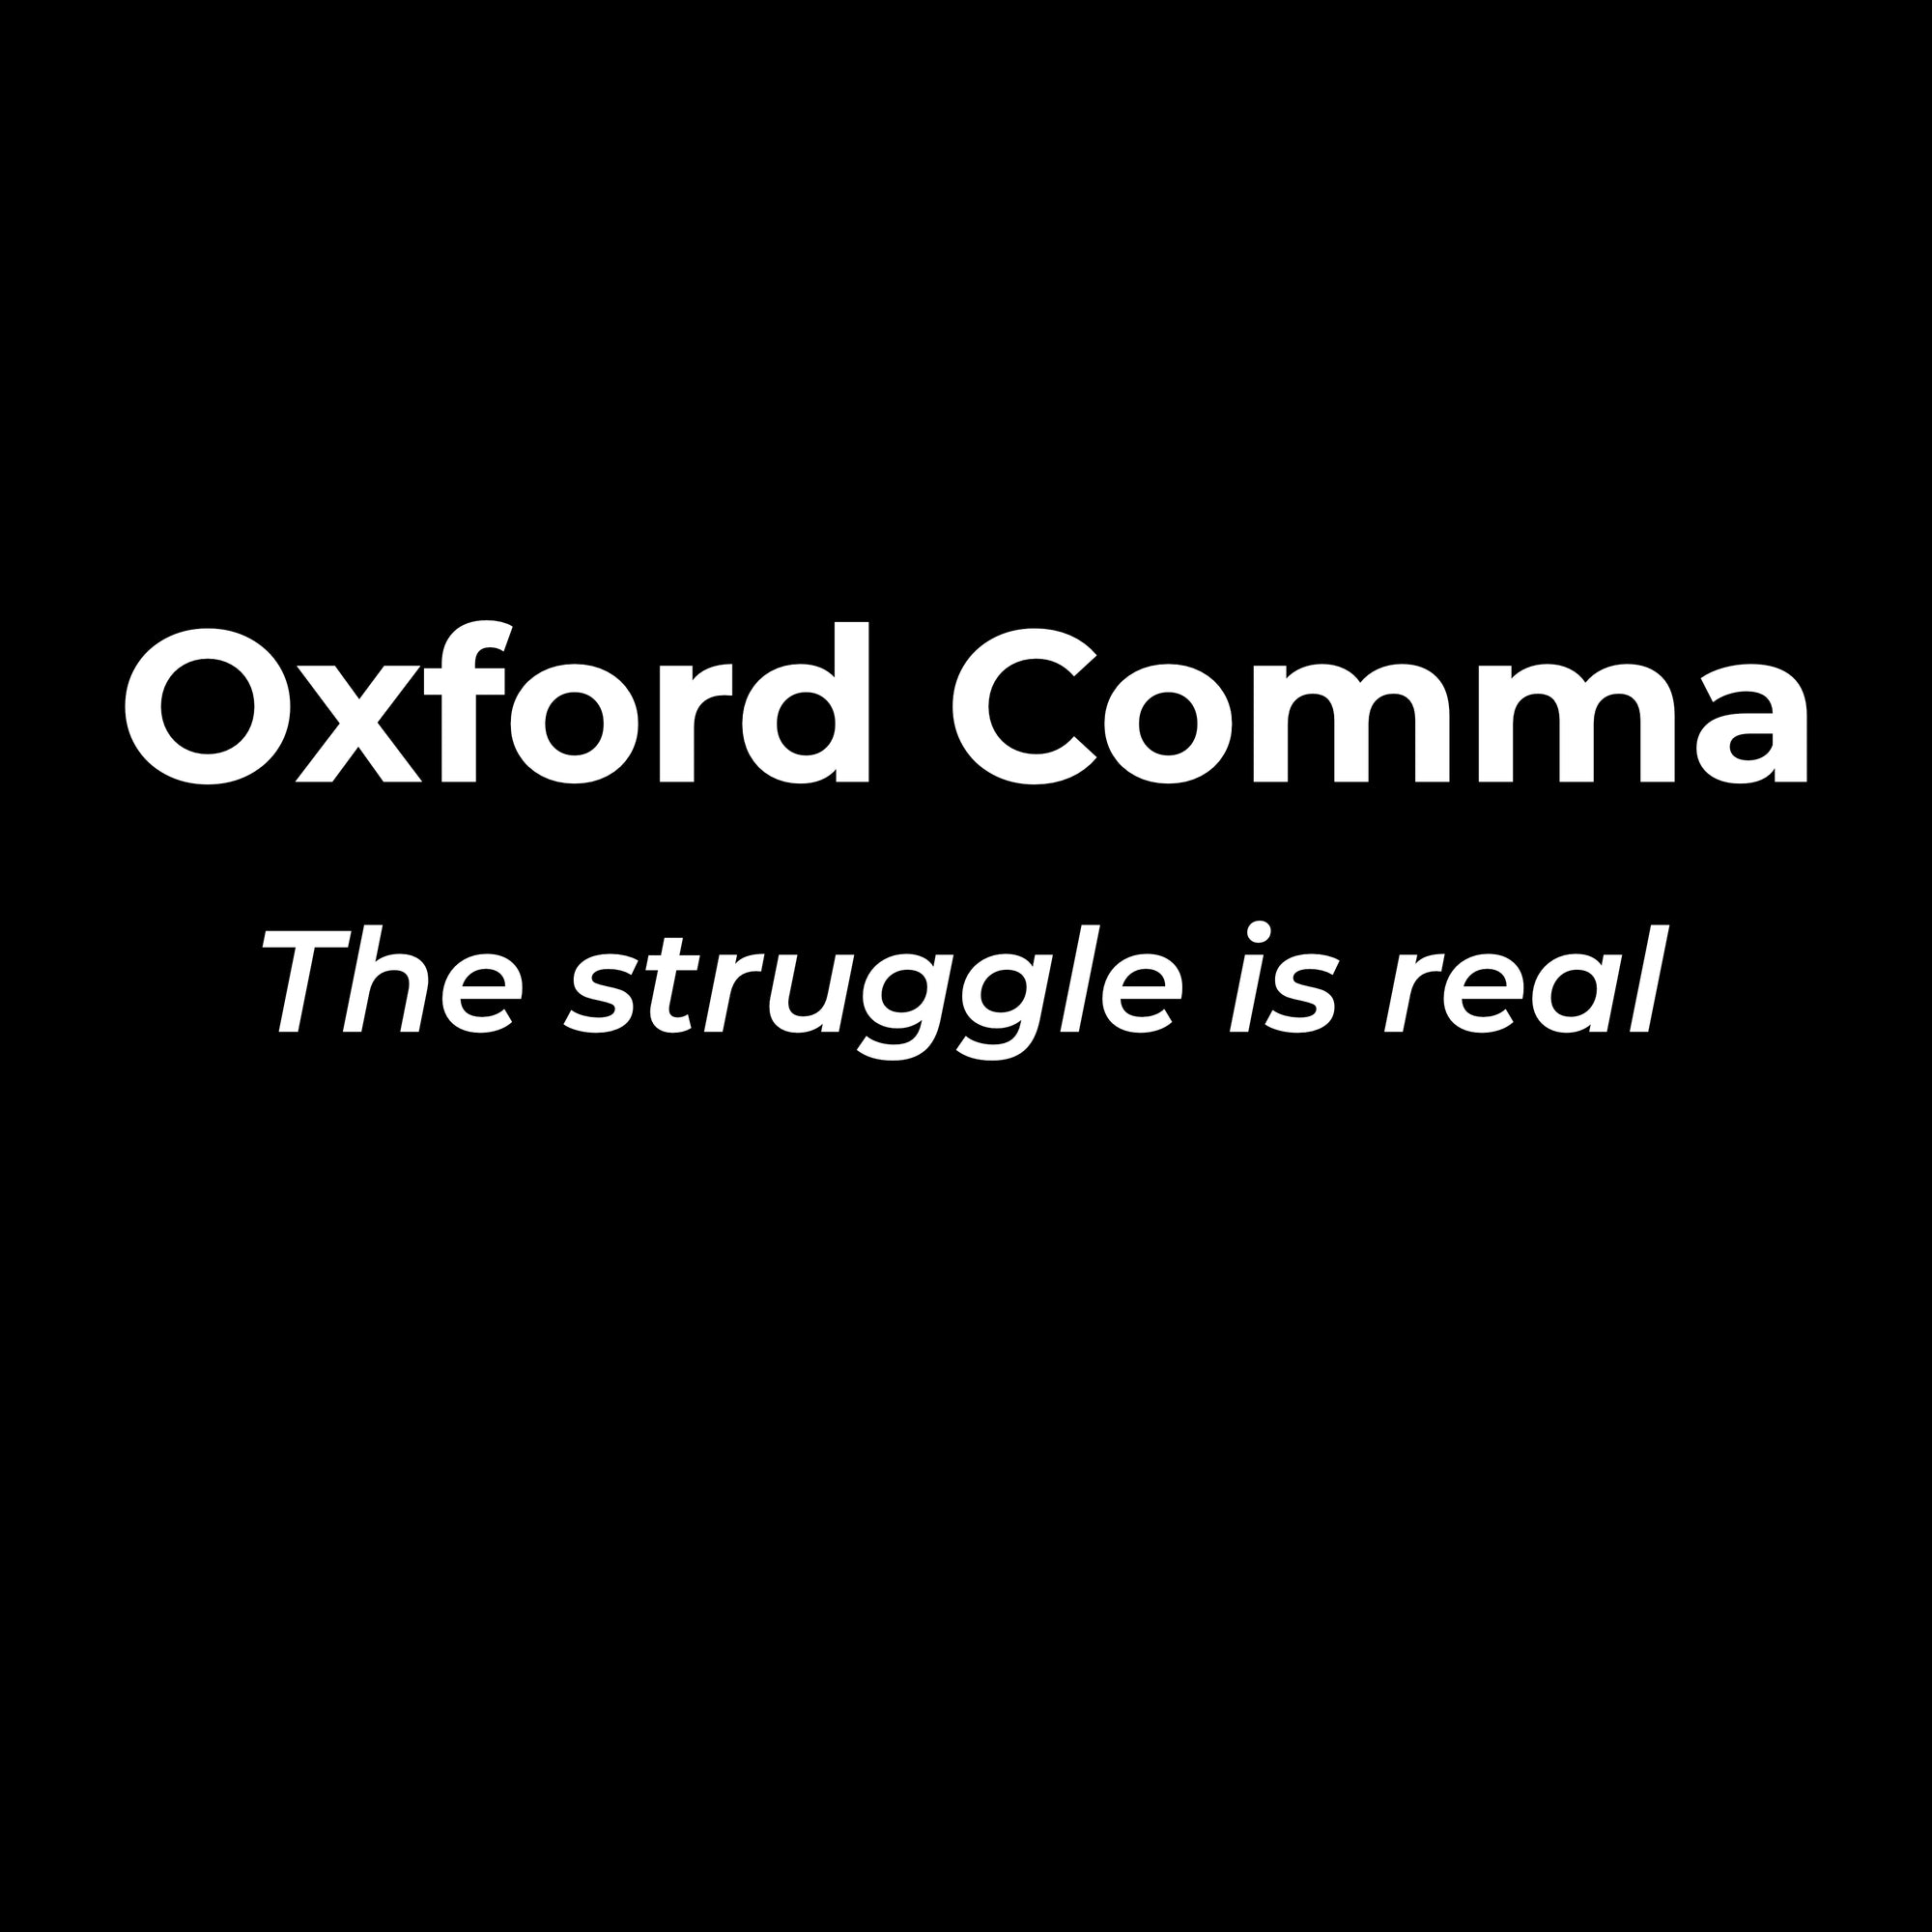 Oxford Comma The Struggle Is Real Printed T-Shirt-Black